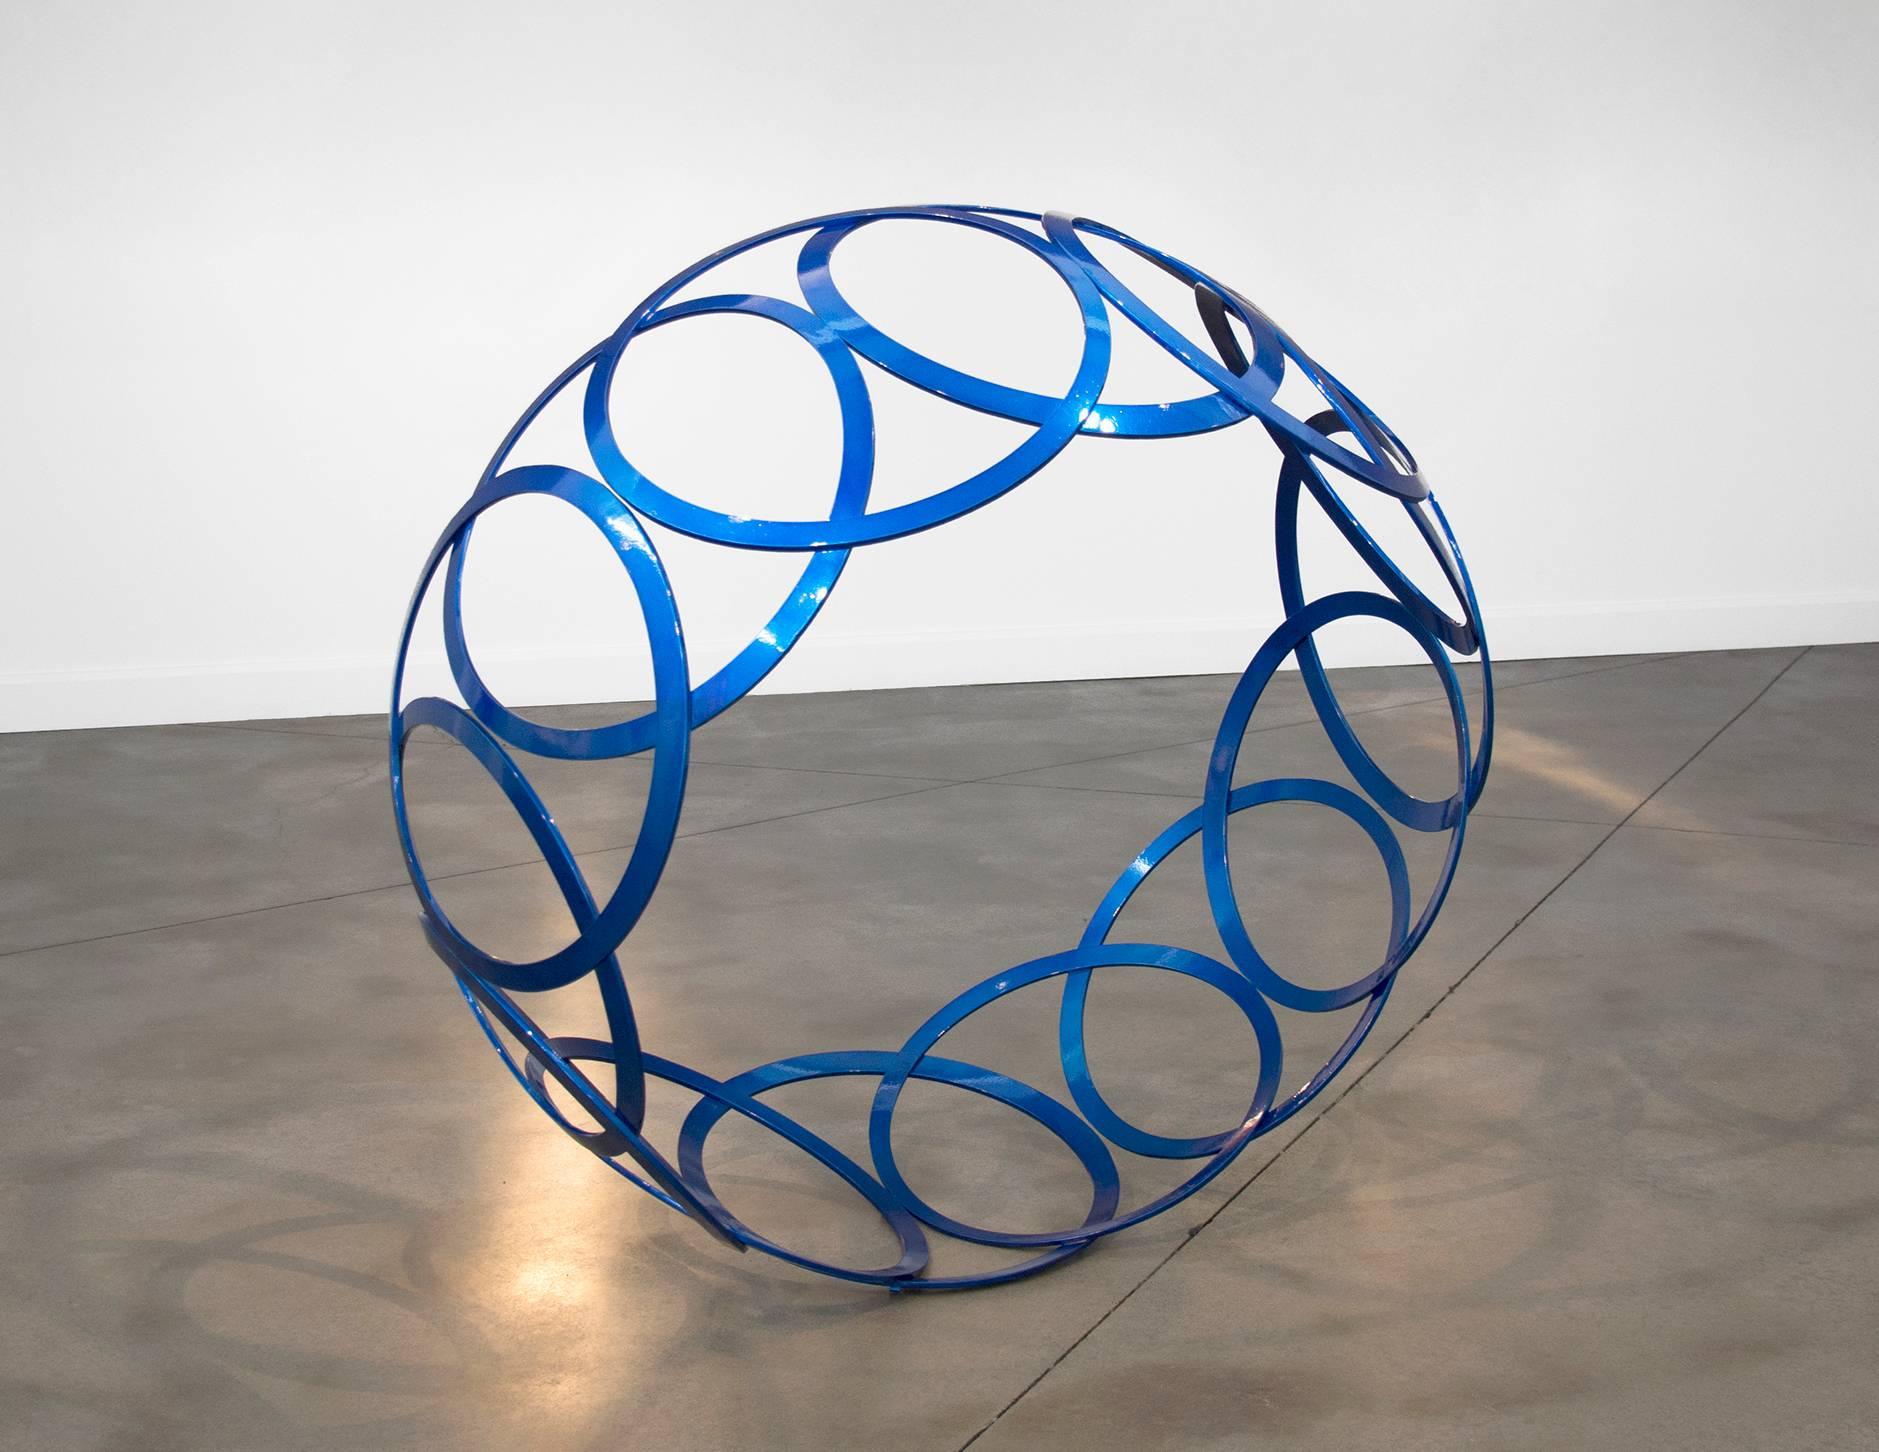 Circular Motion - large, bright blue, geometric abstract, coated steel sculpture